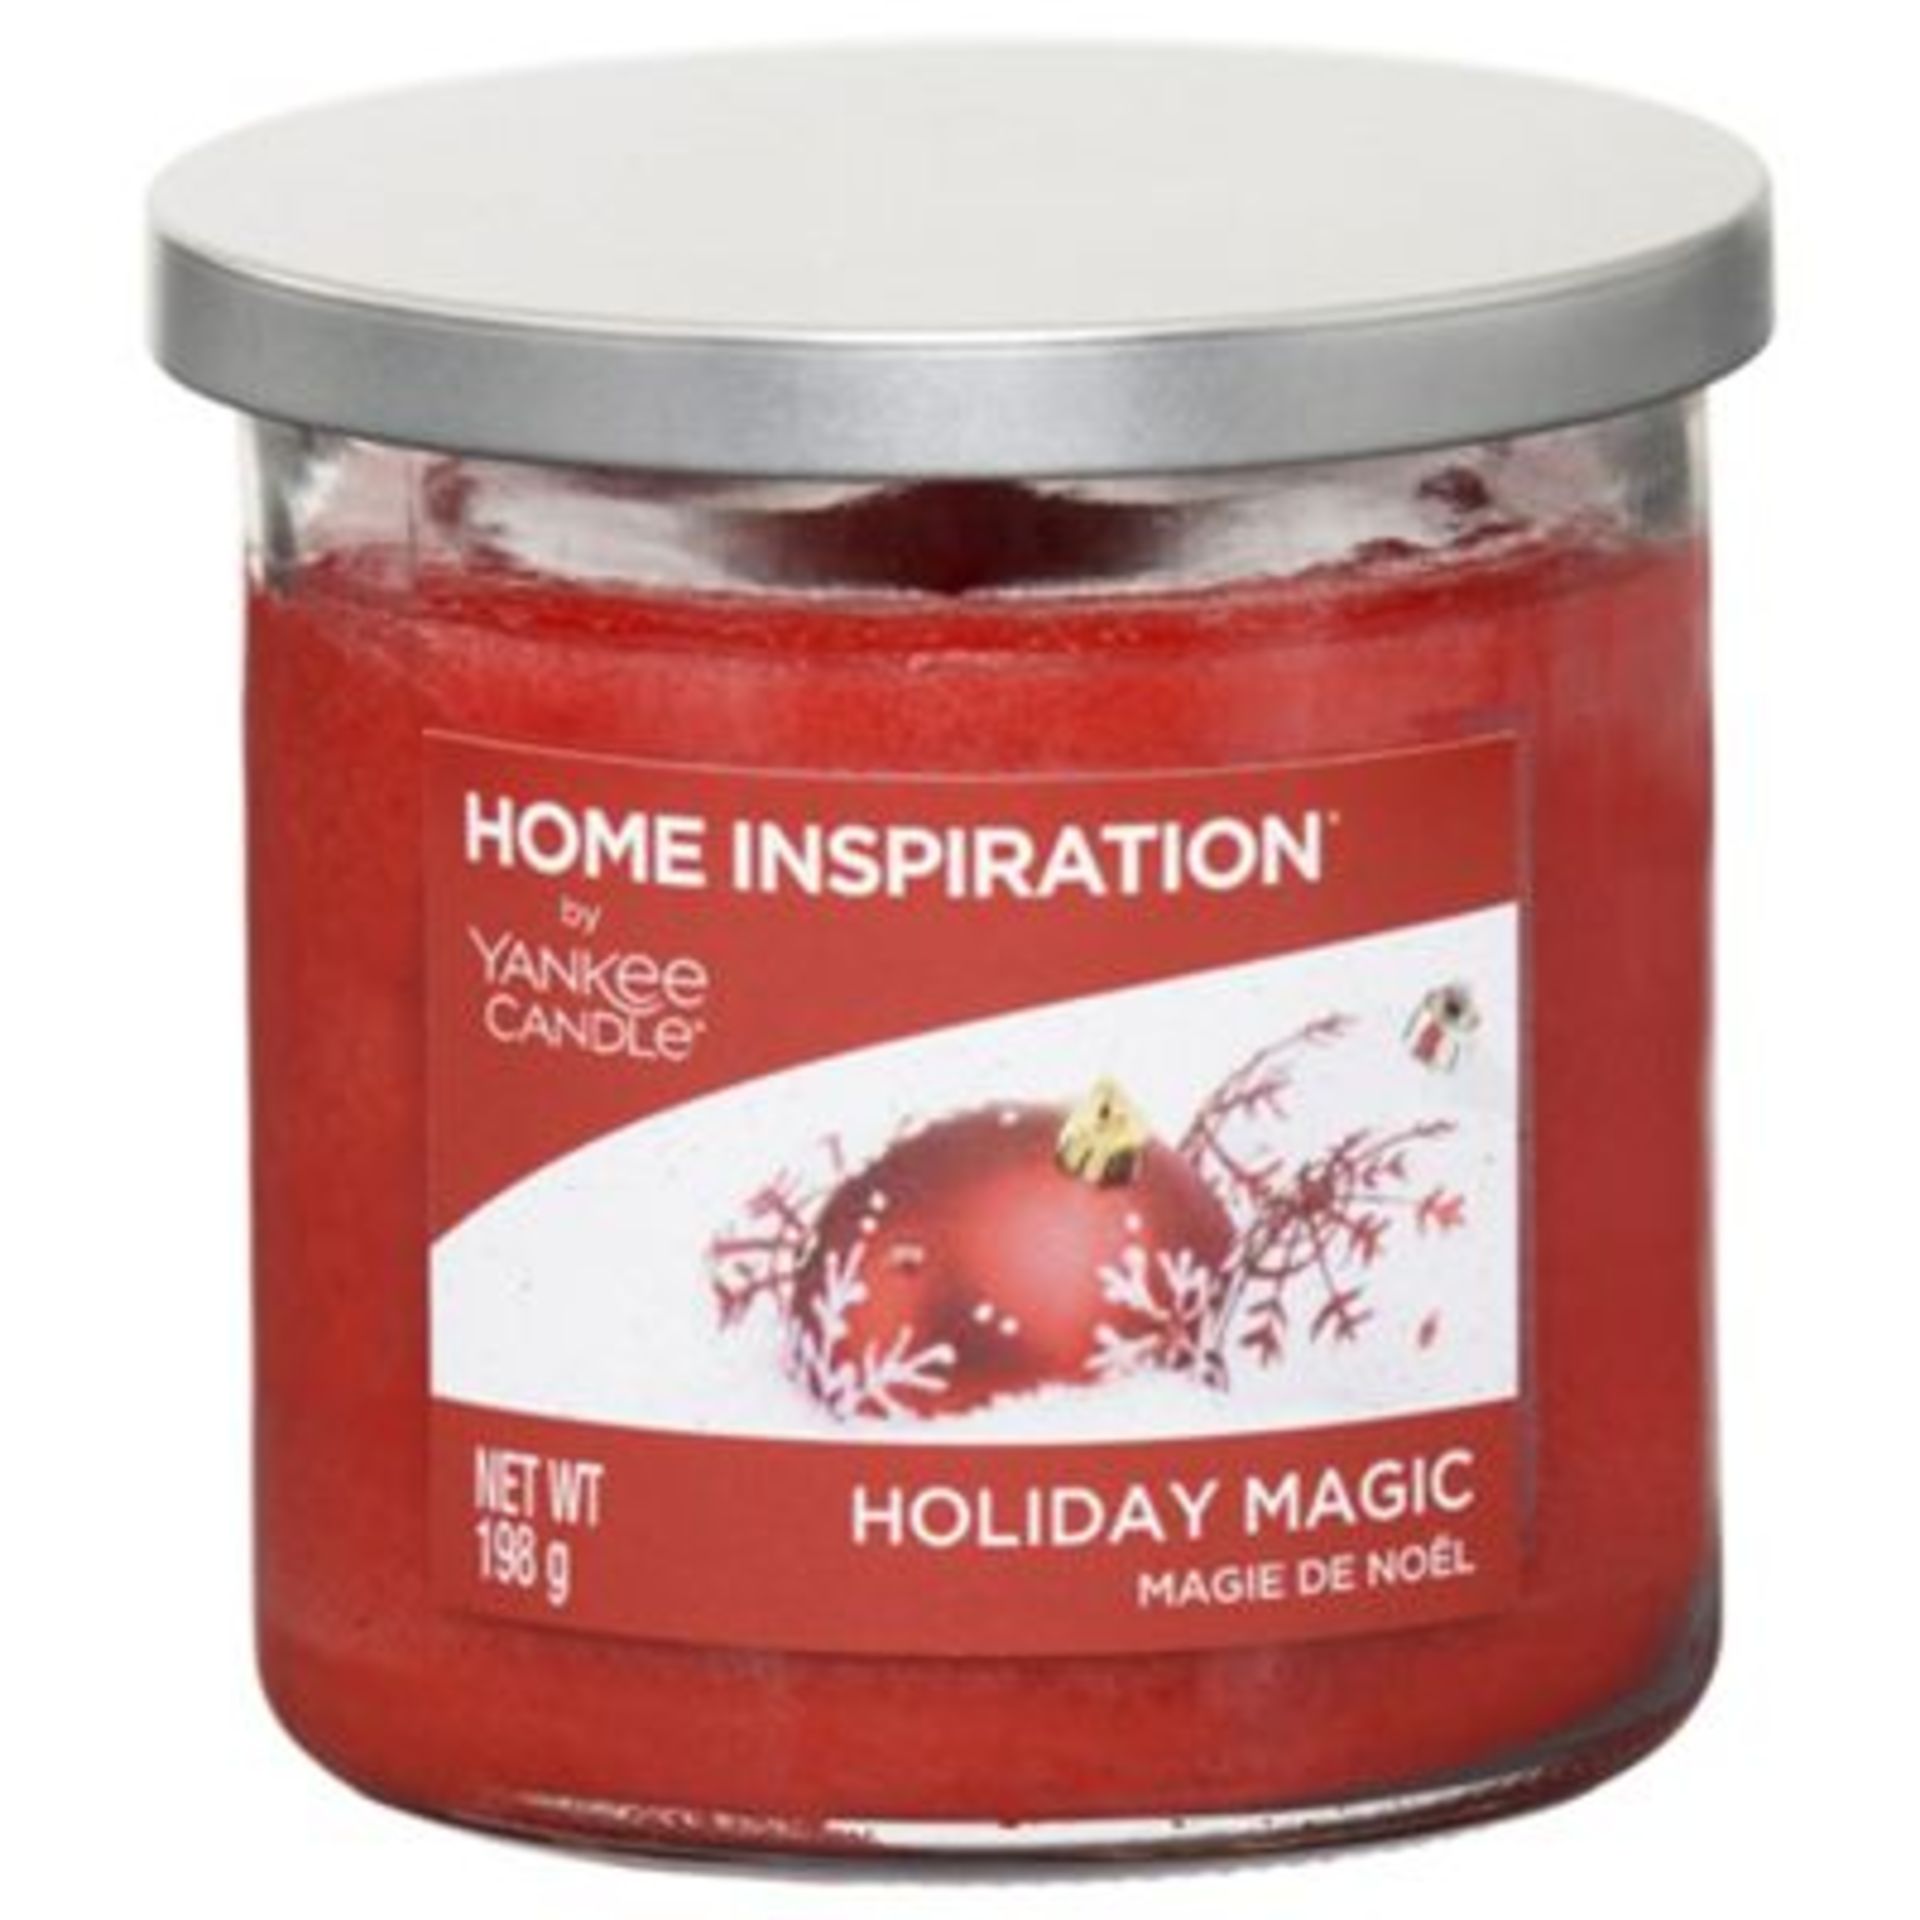 V Brand New Home Inspiration by Yankee Candle Holiday Magic 198g Tumbler Candle - ISP £7.99 Ebay